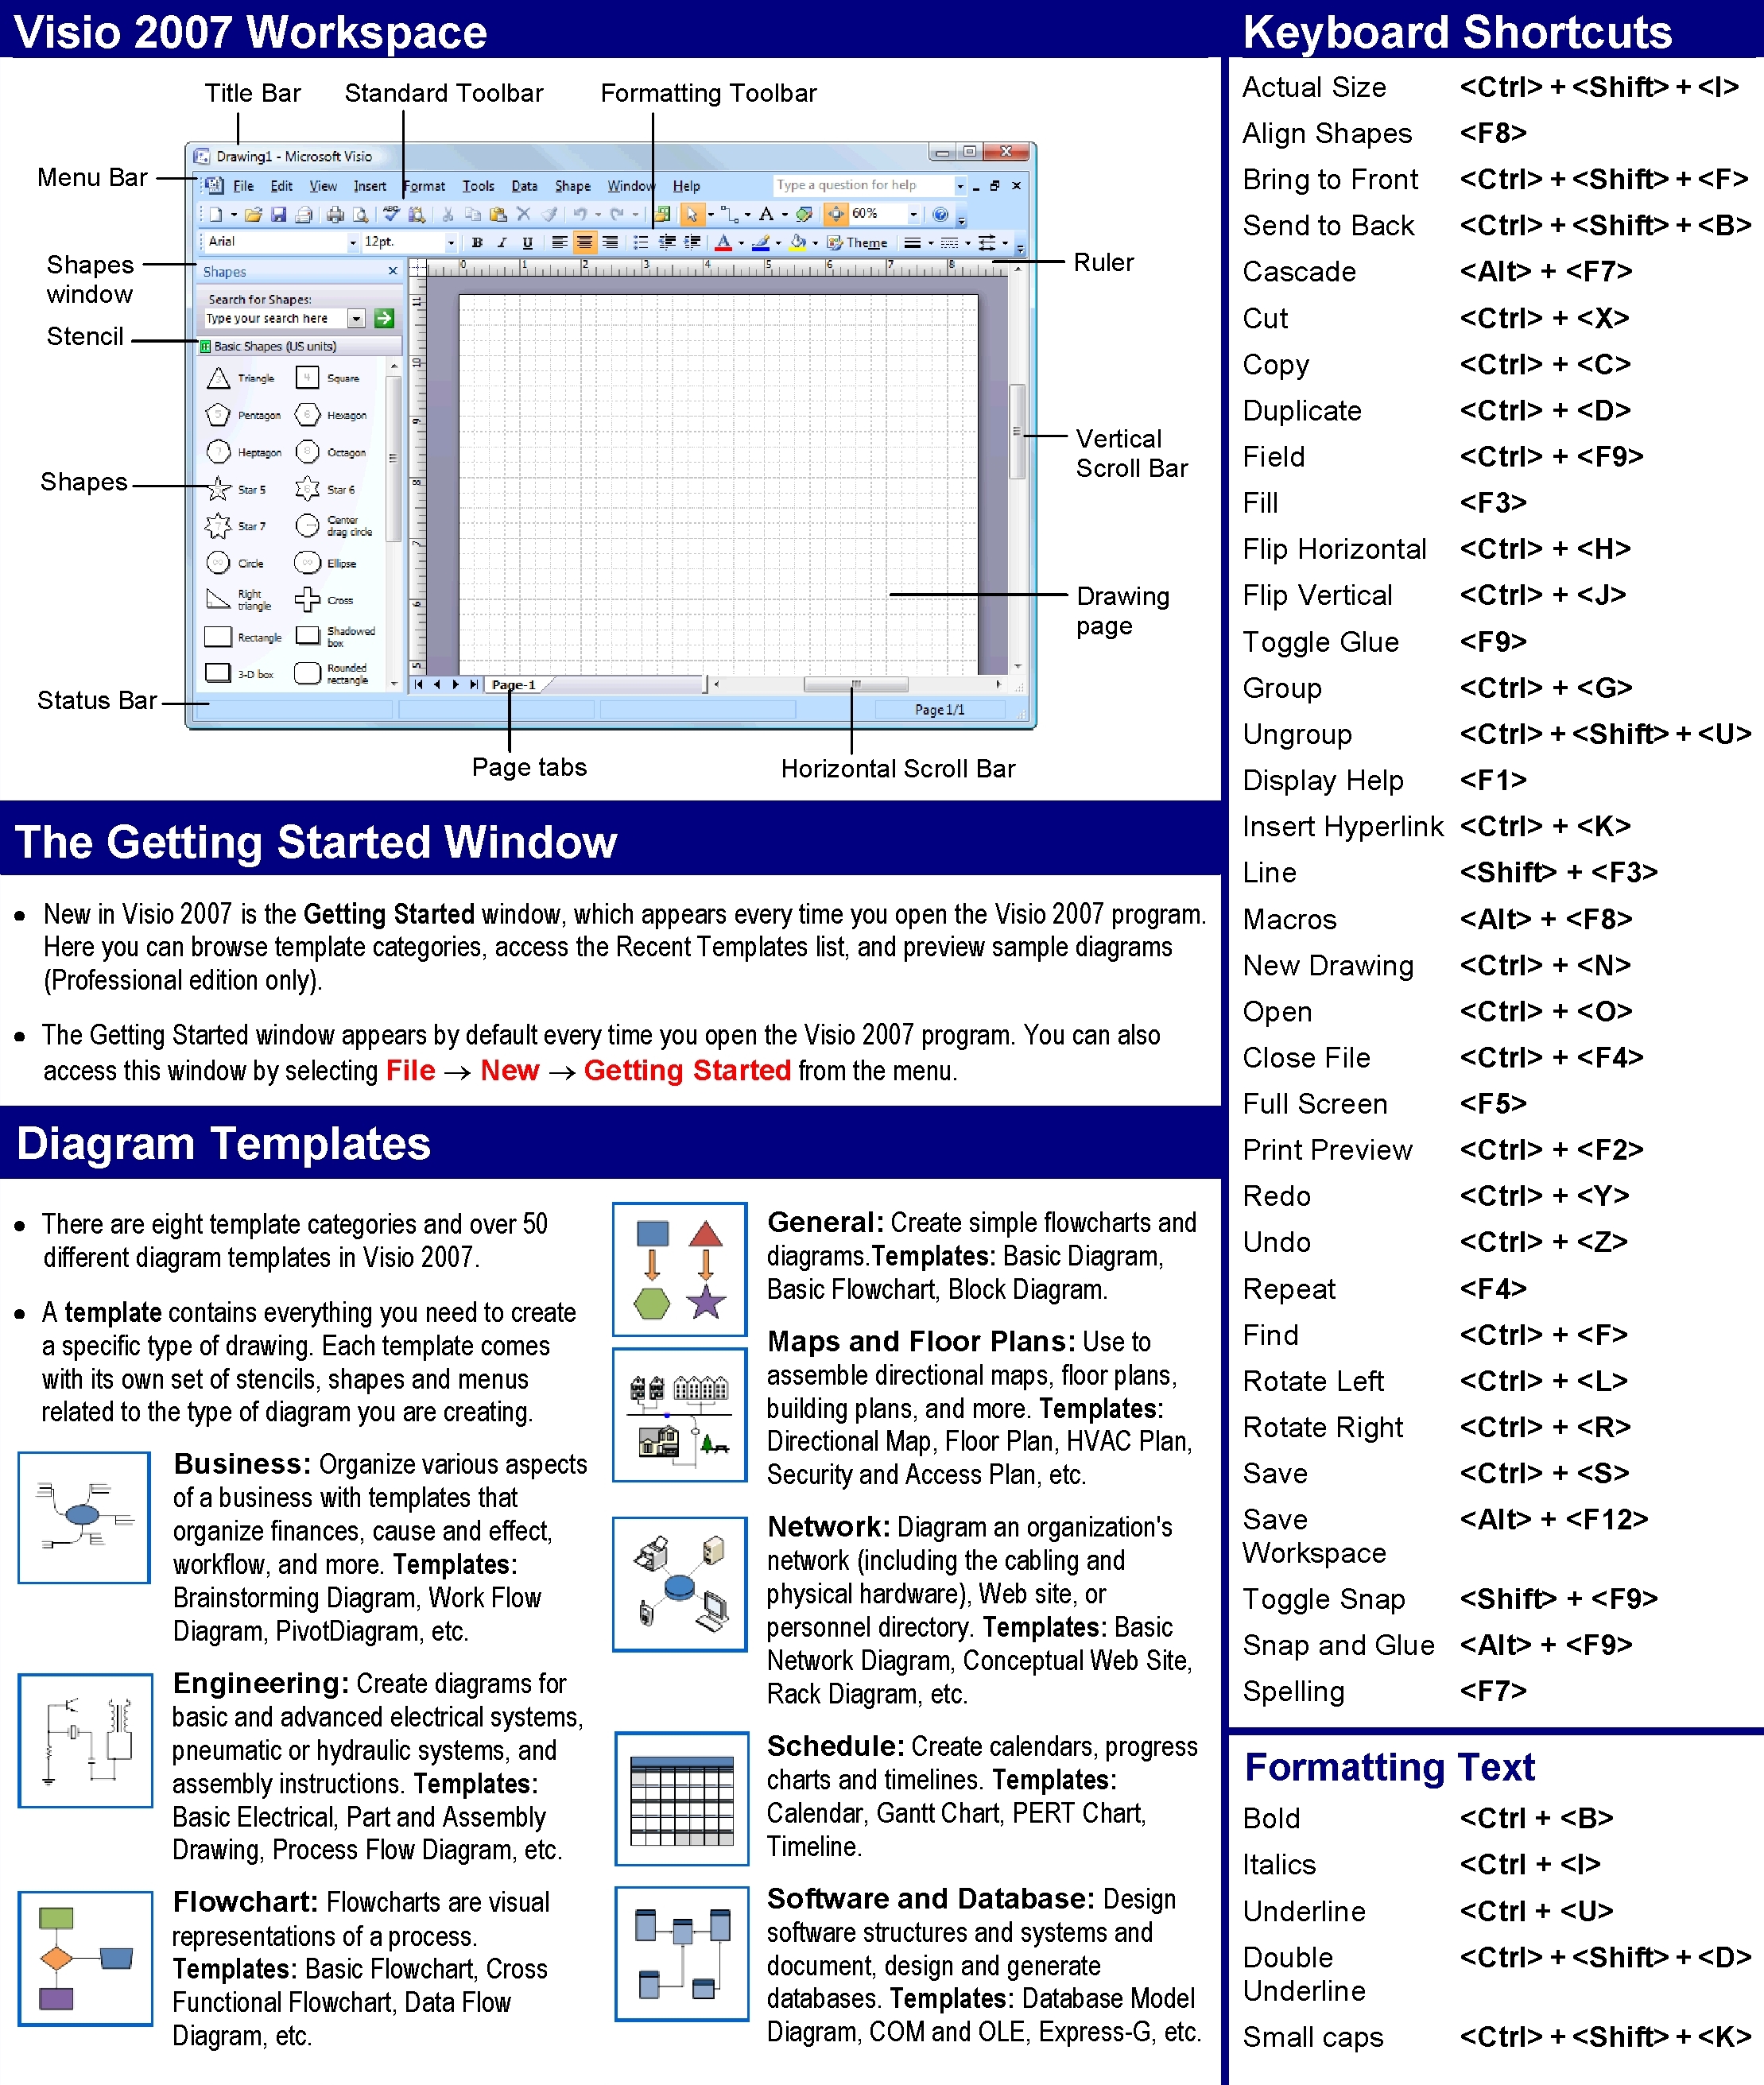 visio-2007-quick-reference-1.jpg